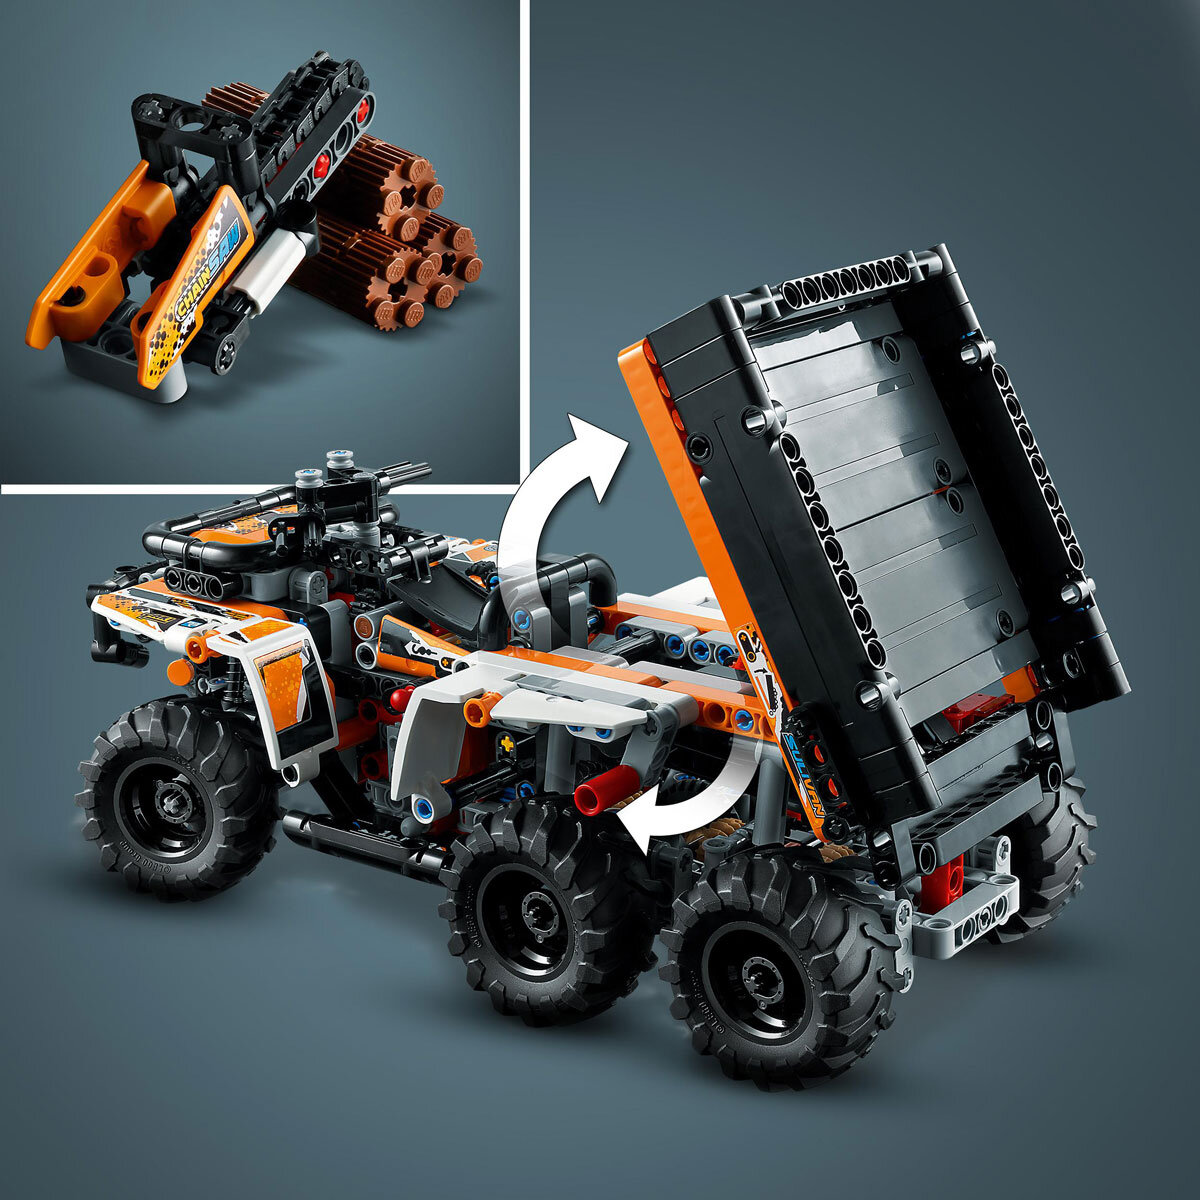 Buy LEGO Technic All-Terrain Vehicle Features1 Image at Costco.co.uk